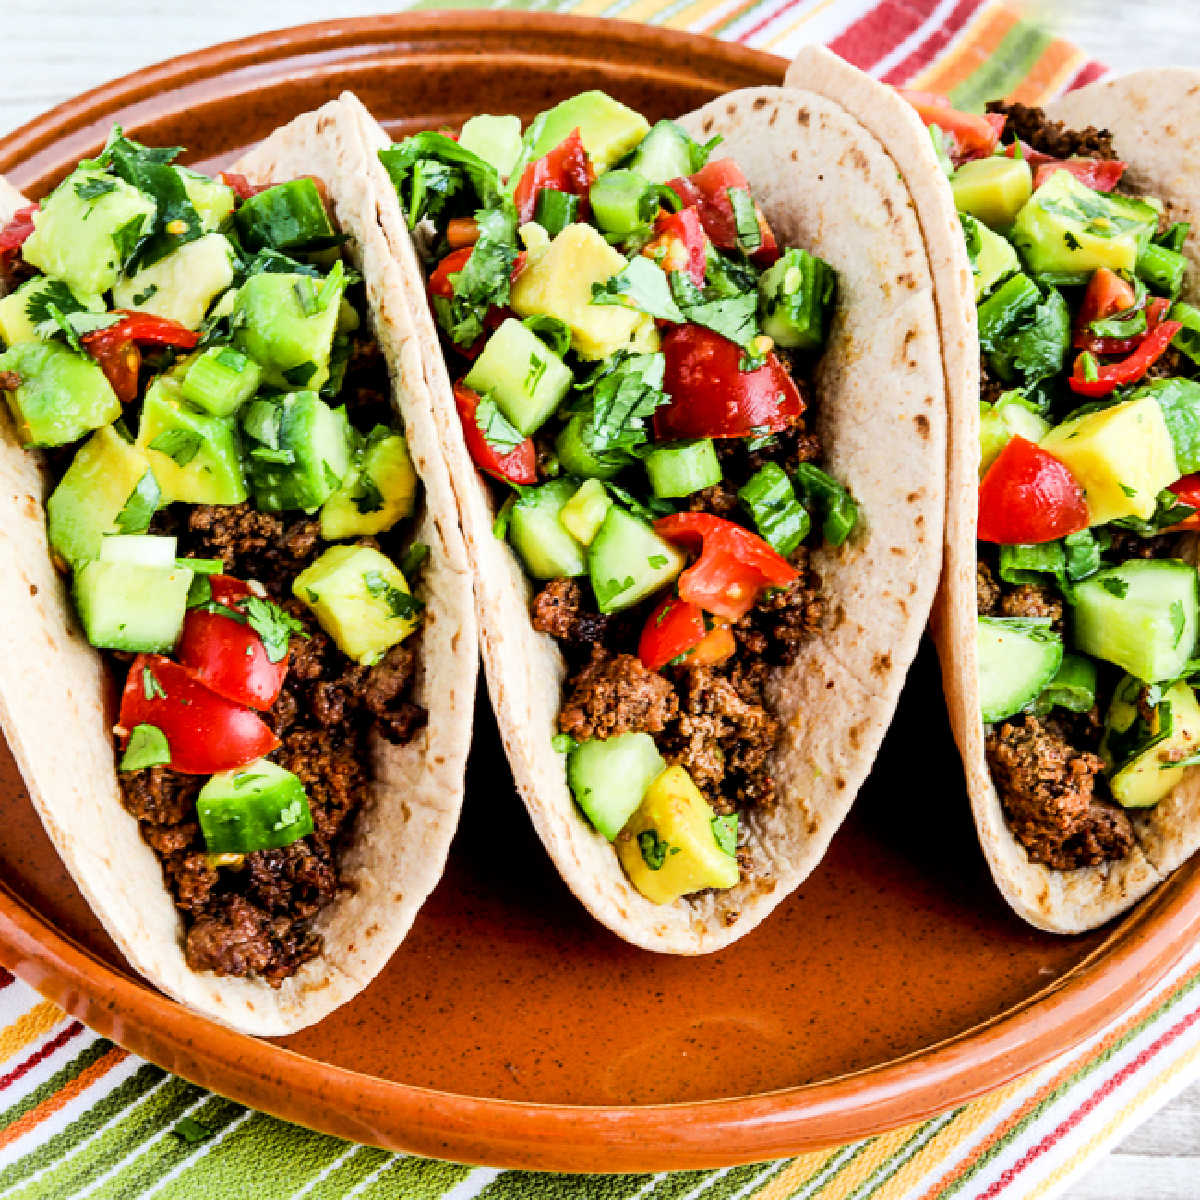 Ground Beef Tacos with Tomato-Avocado Salsa, square image of finished tacos on serving plate